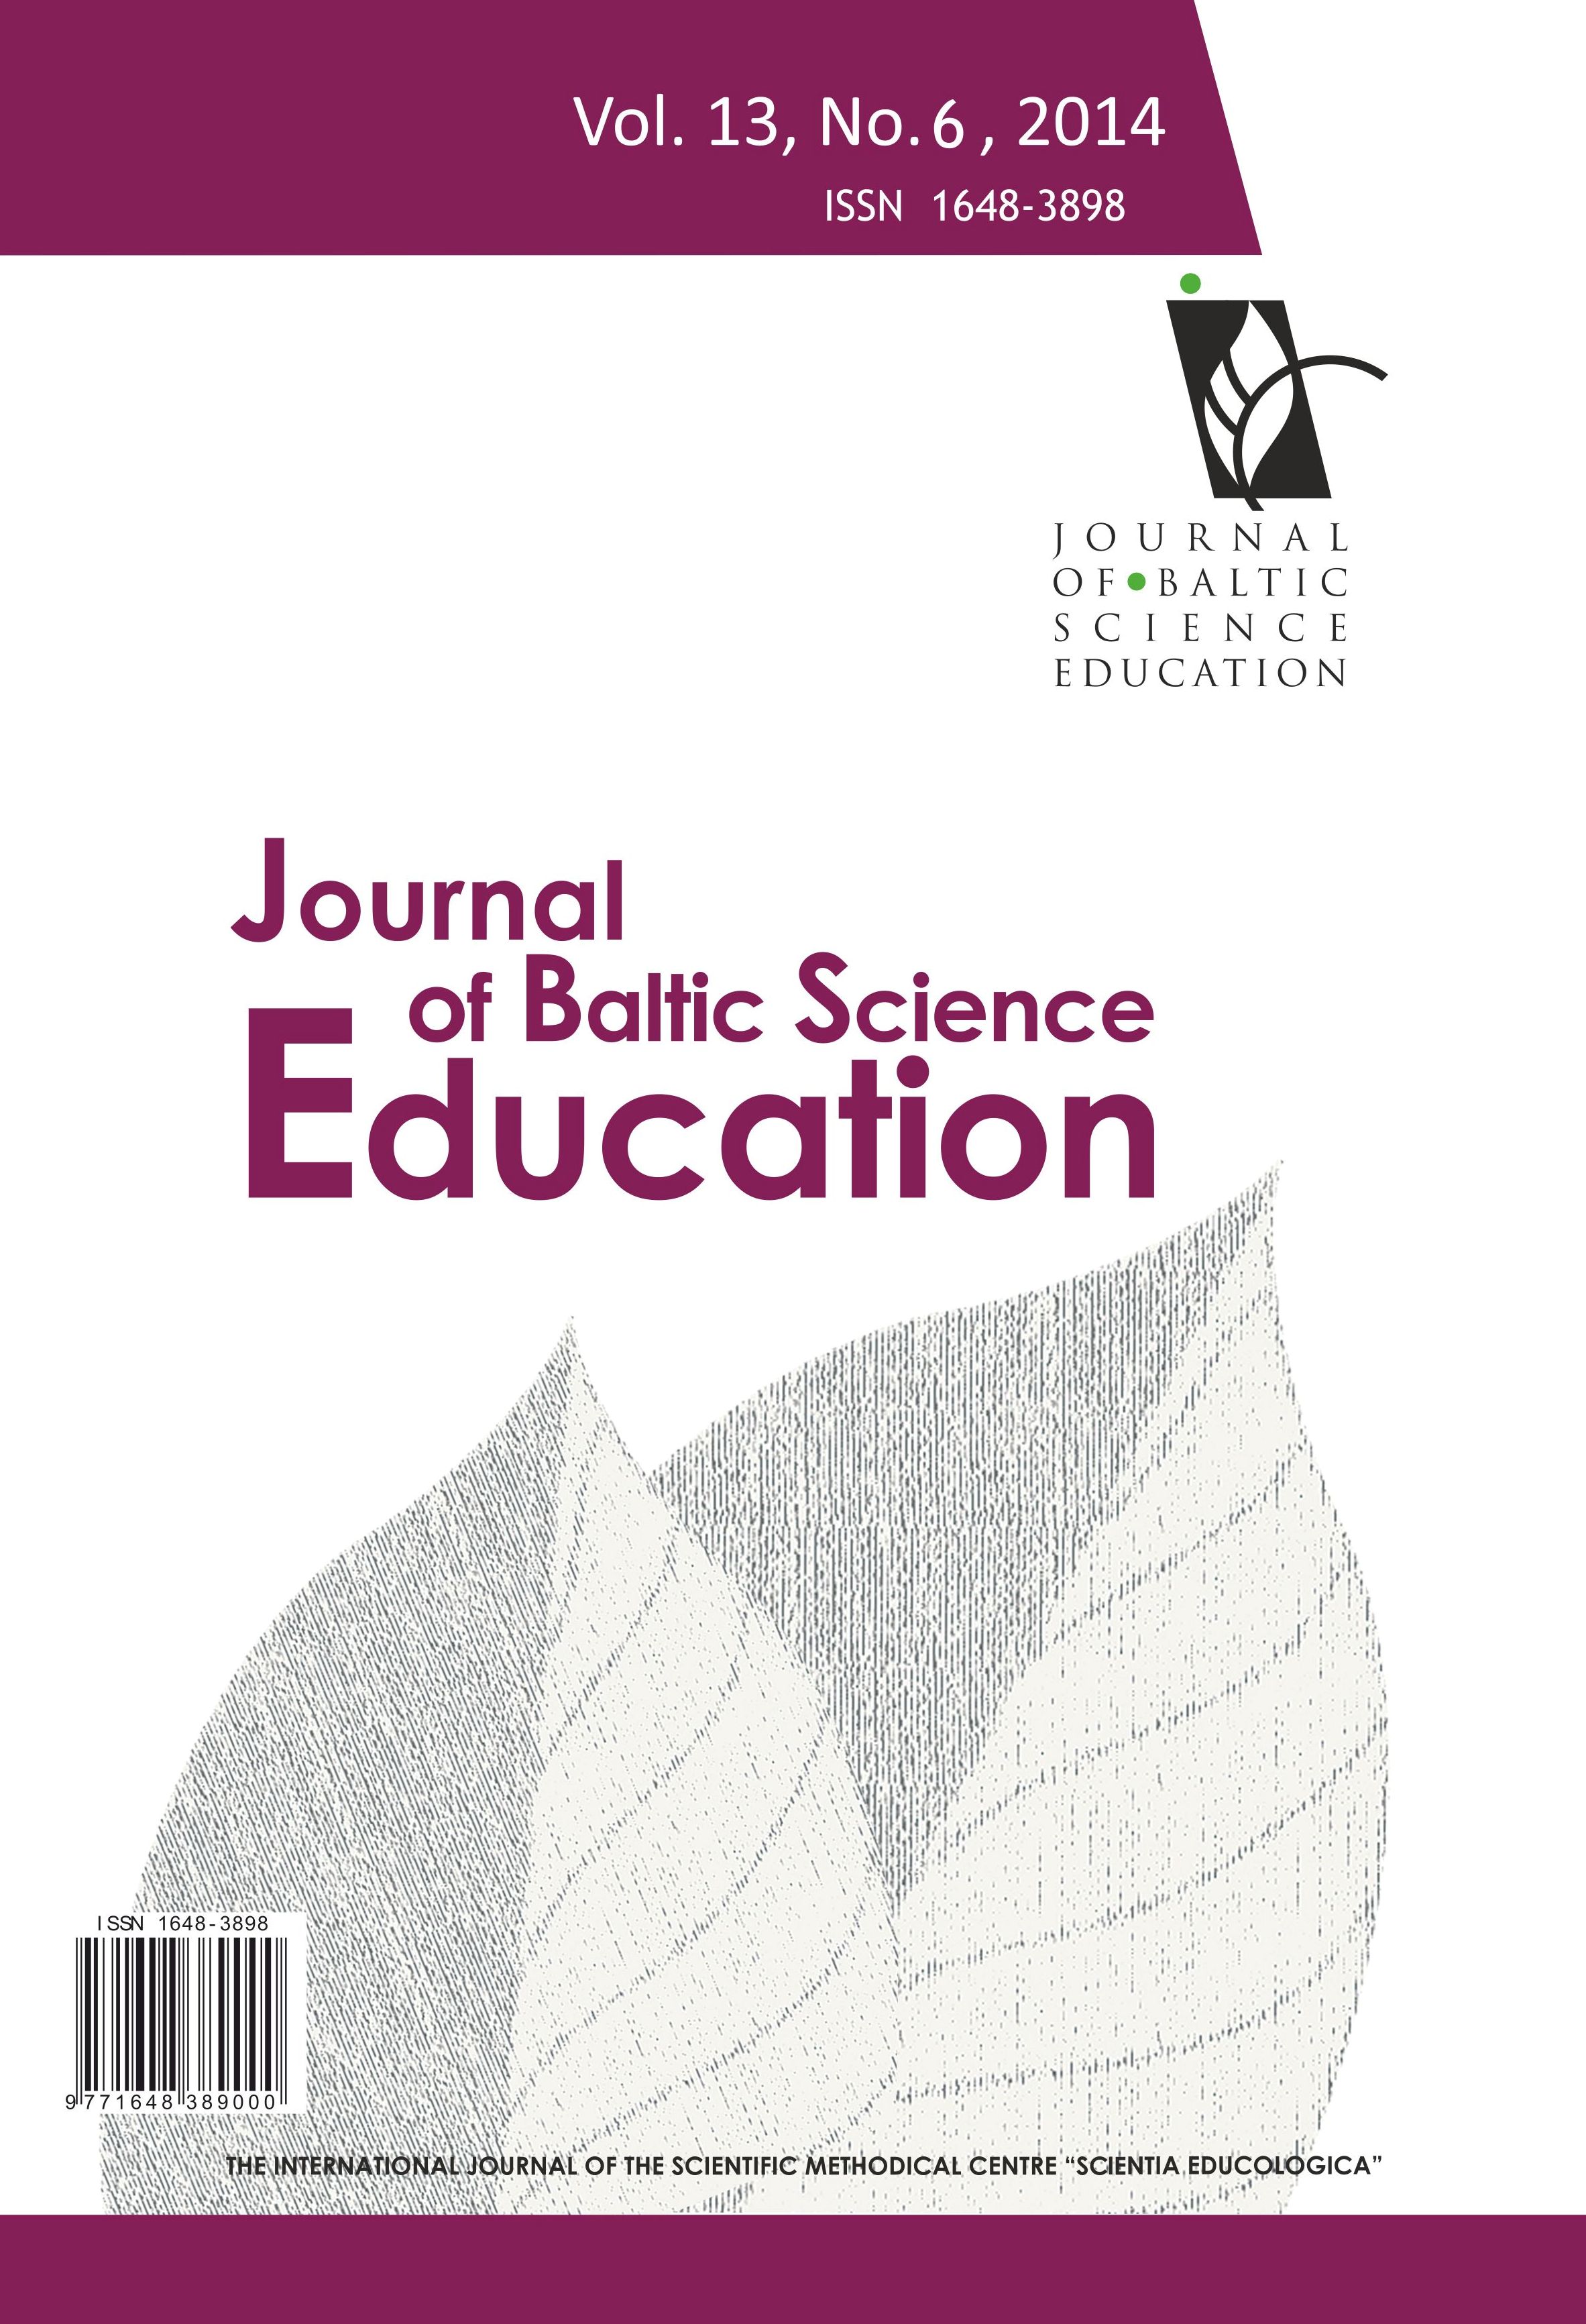 EXAMINING RELATIONSHIPS AMONG TURKISH PRE-SERVICE SCIENCE TEACHERS’ CONCEPTIONS OF TEACHING AND LEARNING, SCIENTIFIC EPISTEMOLOGICAL BELIEFS AND SCIENCE TEACHING EFFICACY BELIEFS Cover Image